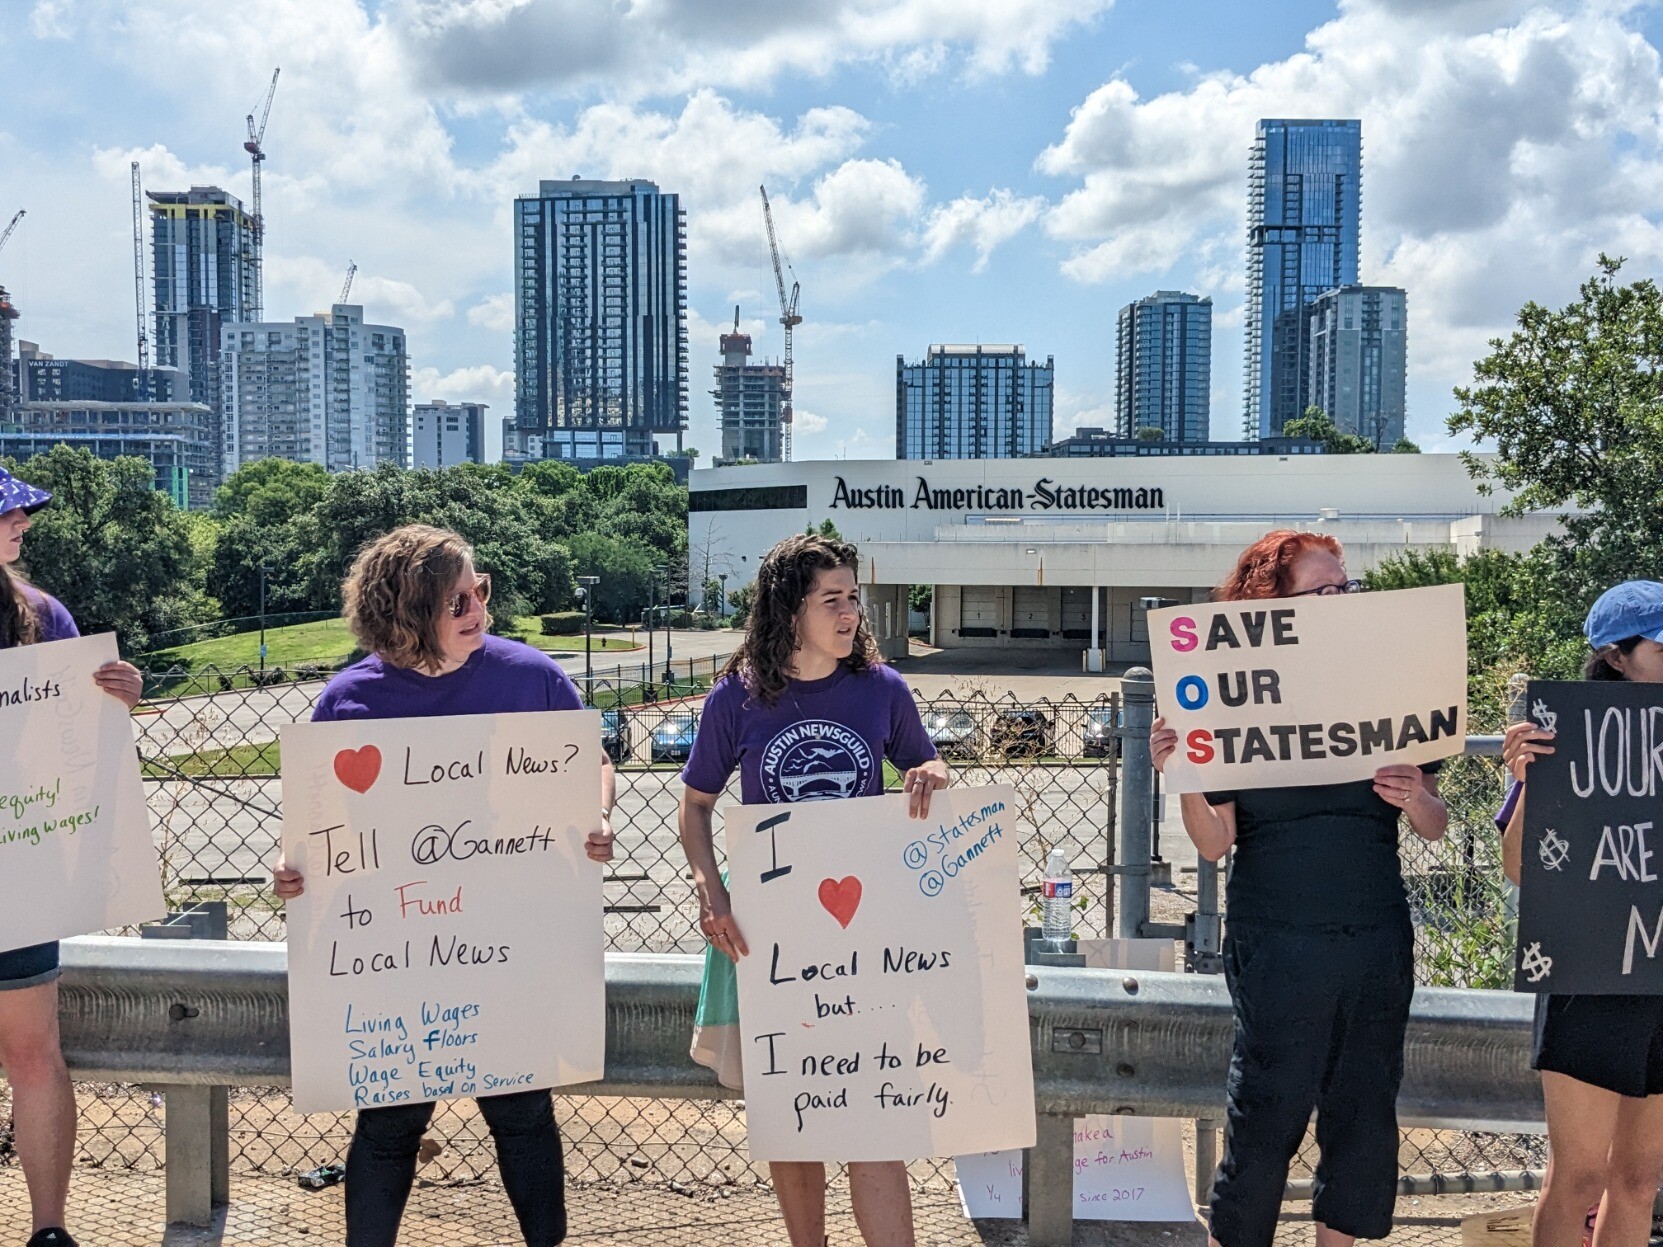 Protesters stand on the Congress Avenue bridge with the Austin skyline behind them, holding signs with messages about Gannett and the Austin American-Statesman, such as "Save Our Statesman" and "I (heart) local news but I need to be paid fairly".